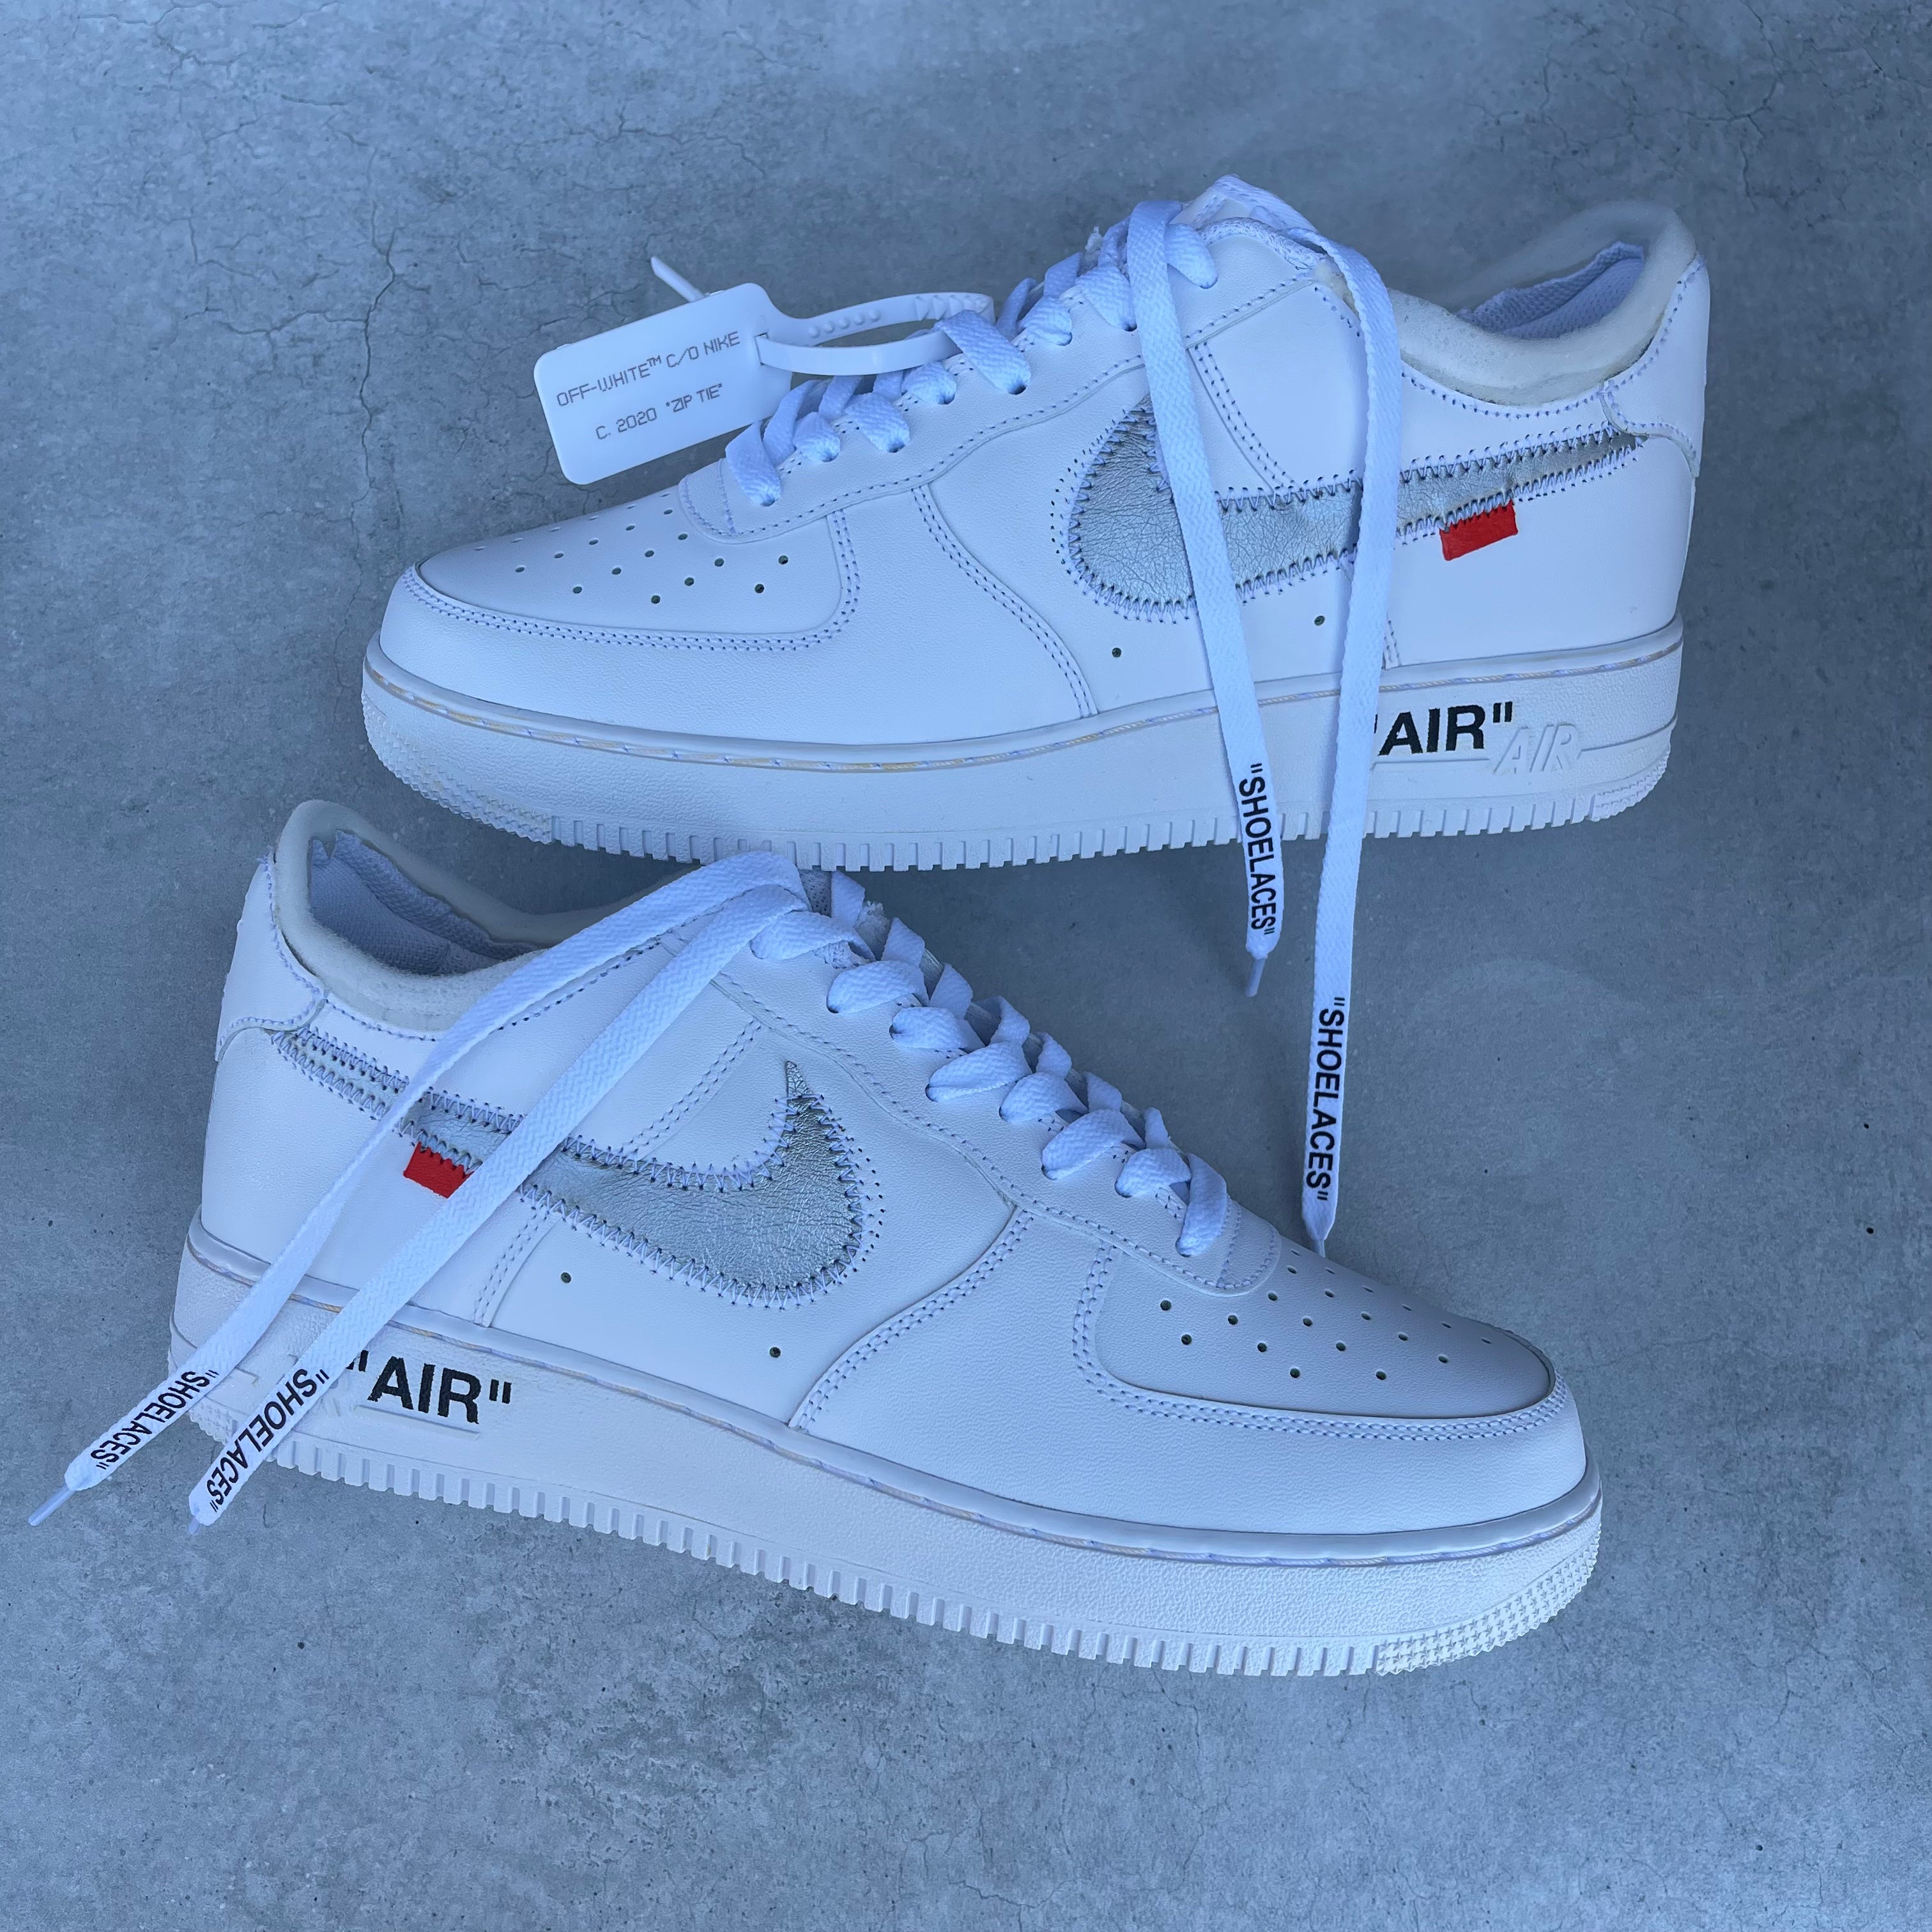 off white air force 1 custom Archives - WearTesters